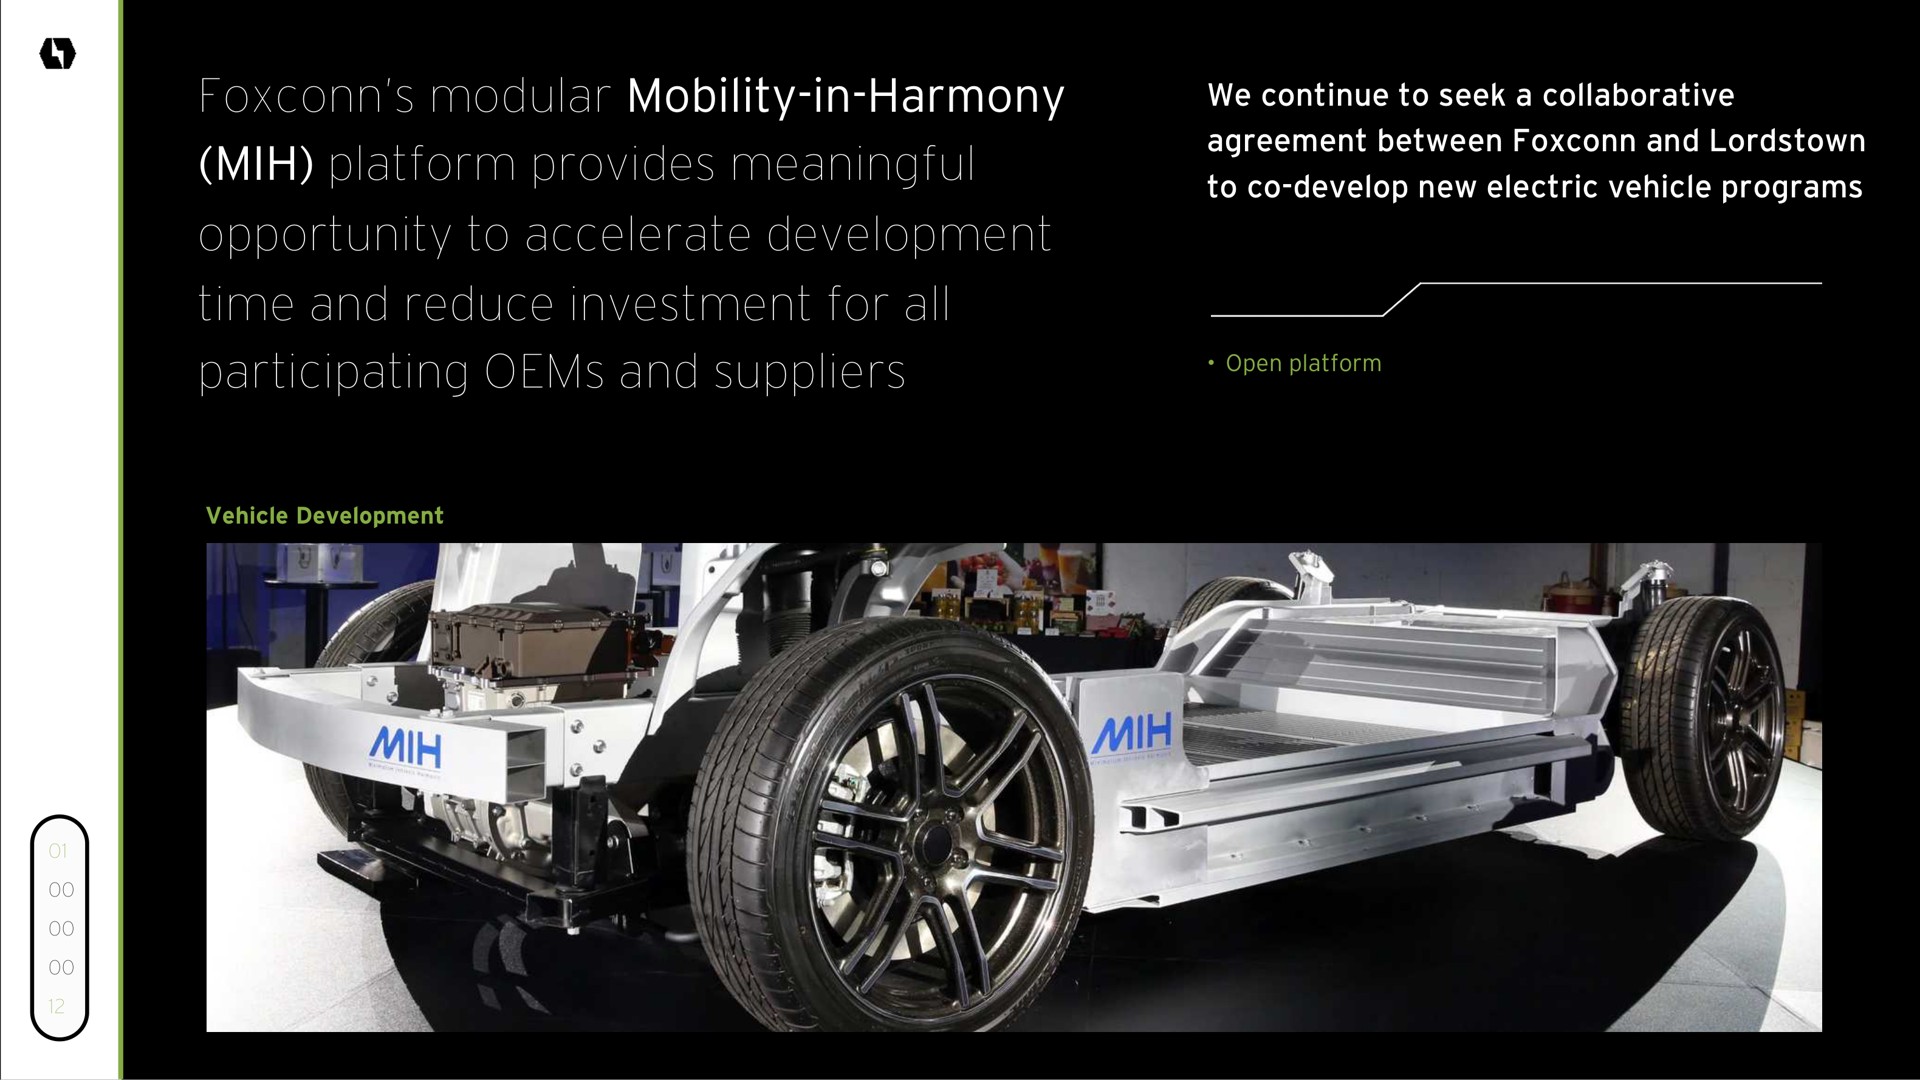 modular mobility in harmony platform provides meaningful opportunity to accelerate development time and reduce investment for all participating and suppliers | Lordstown Motors